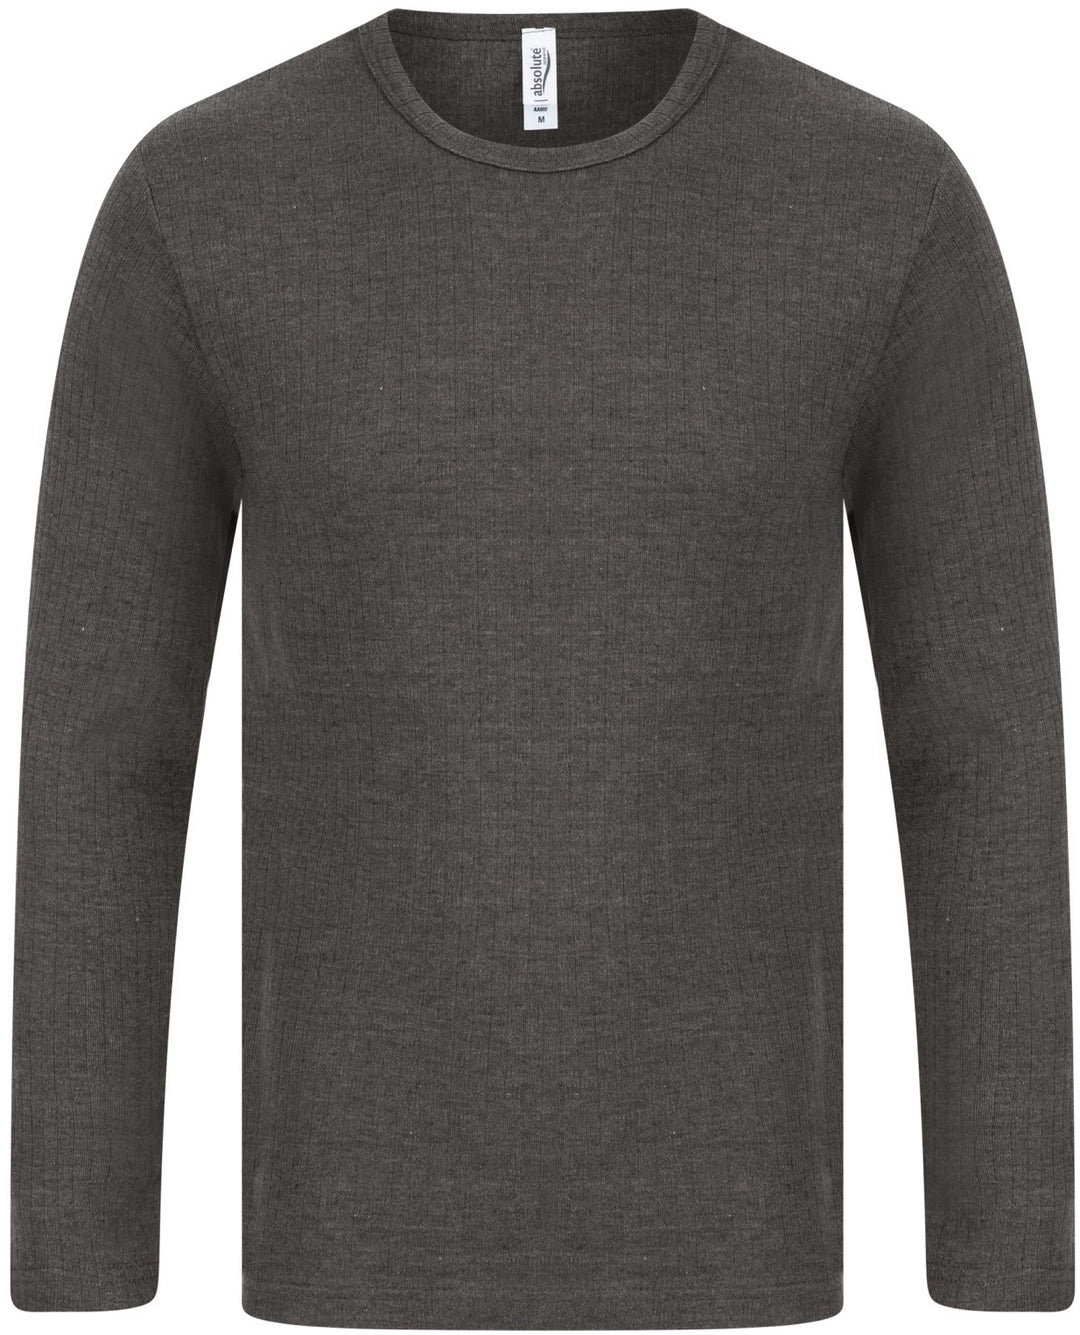 Absolute Apparel AA502 Adult Thermal Long Sleeve T-Shirt - COOZO